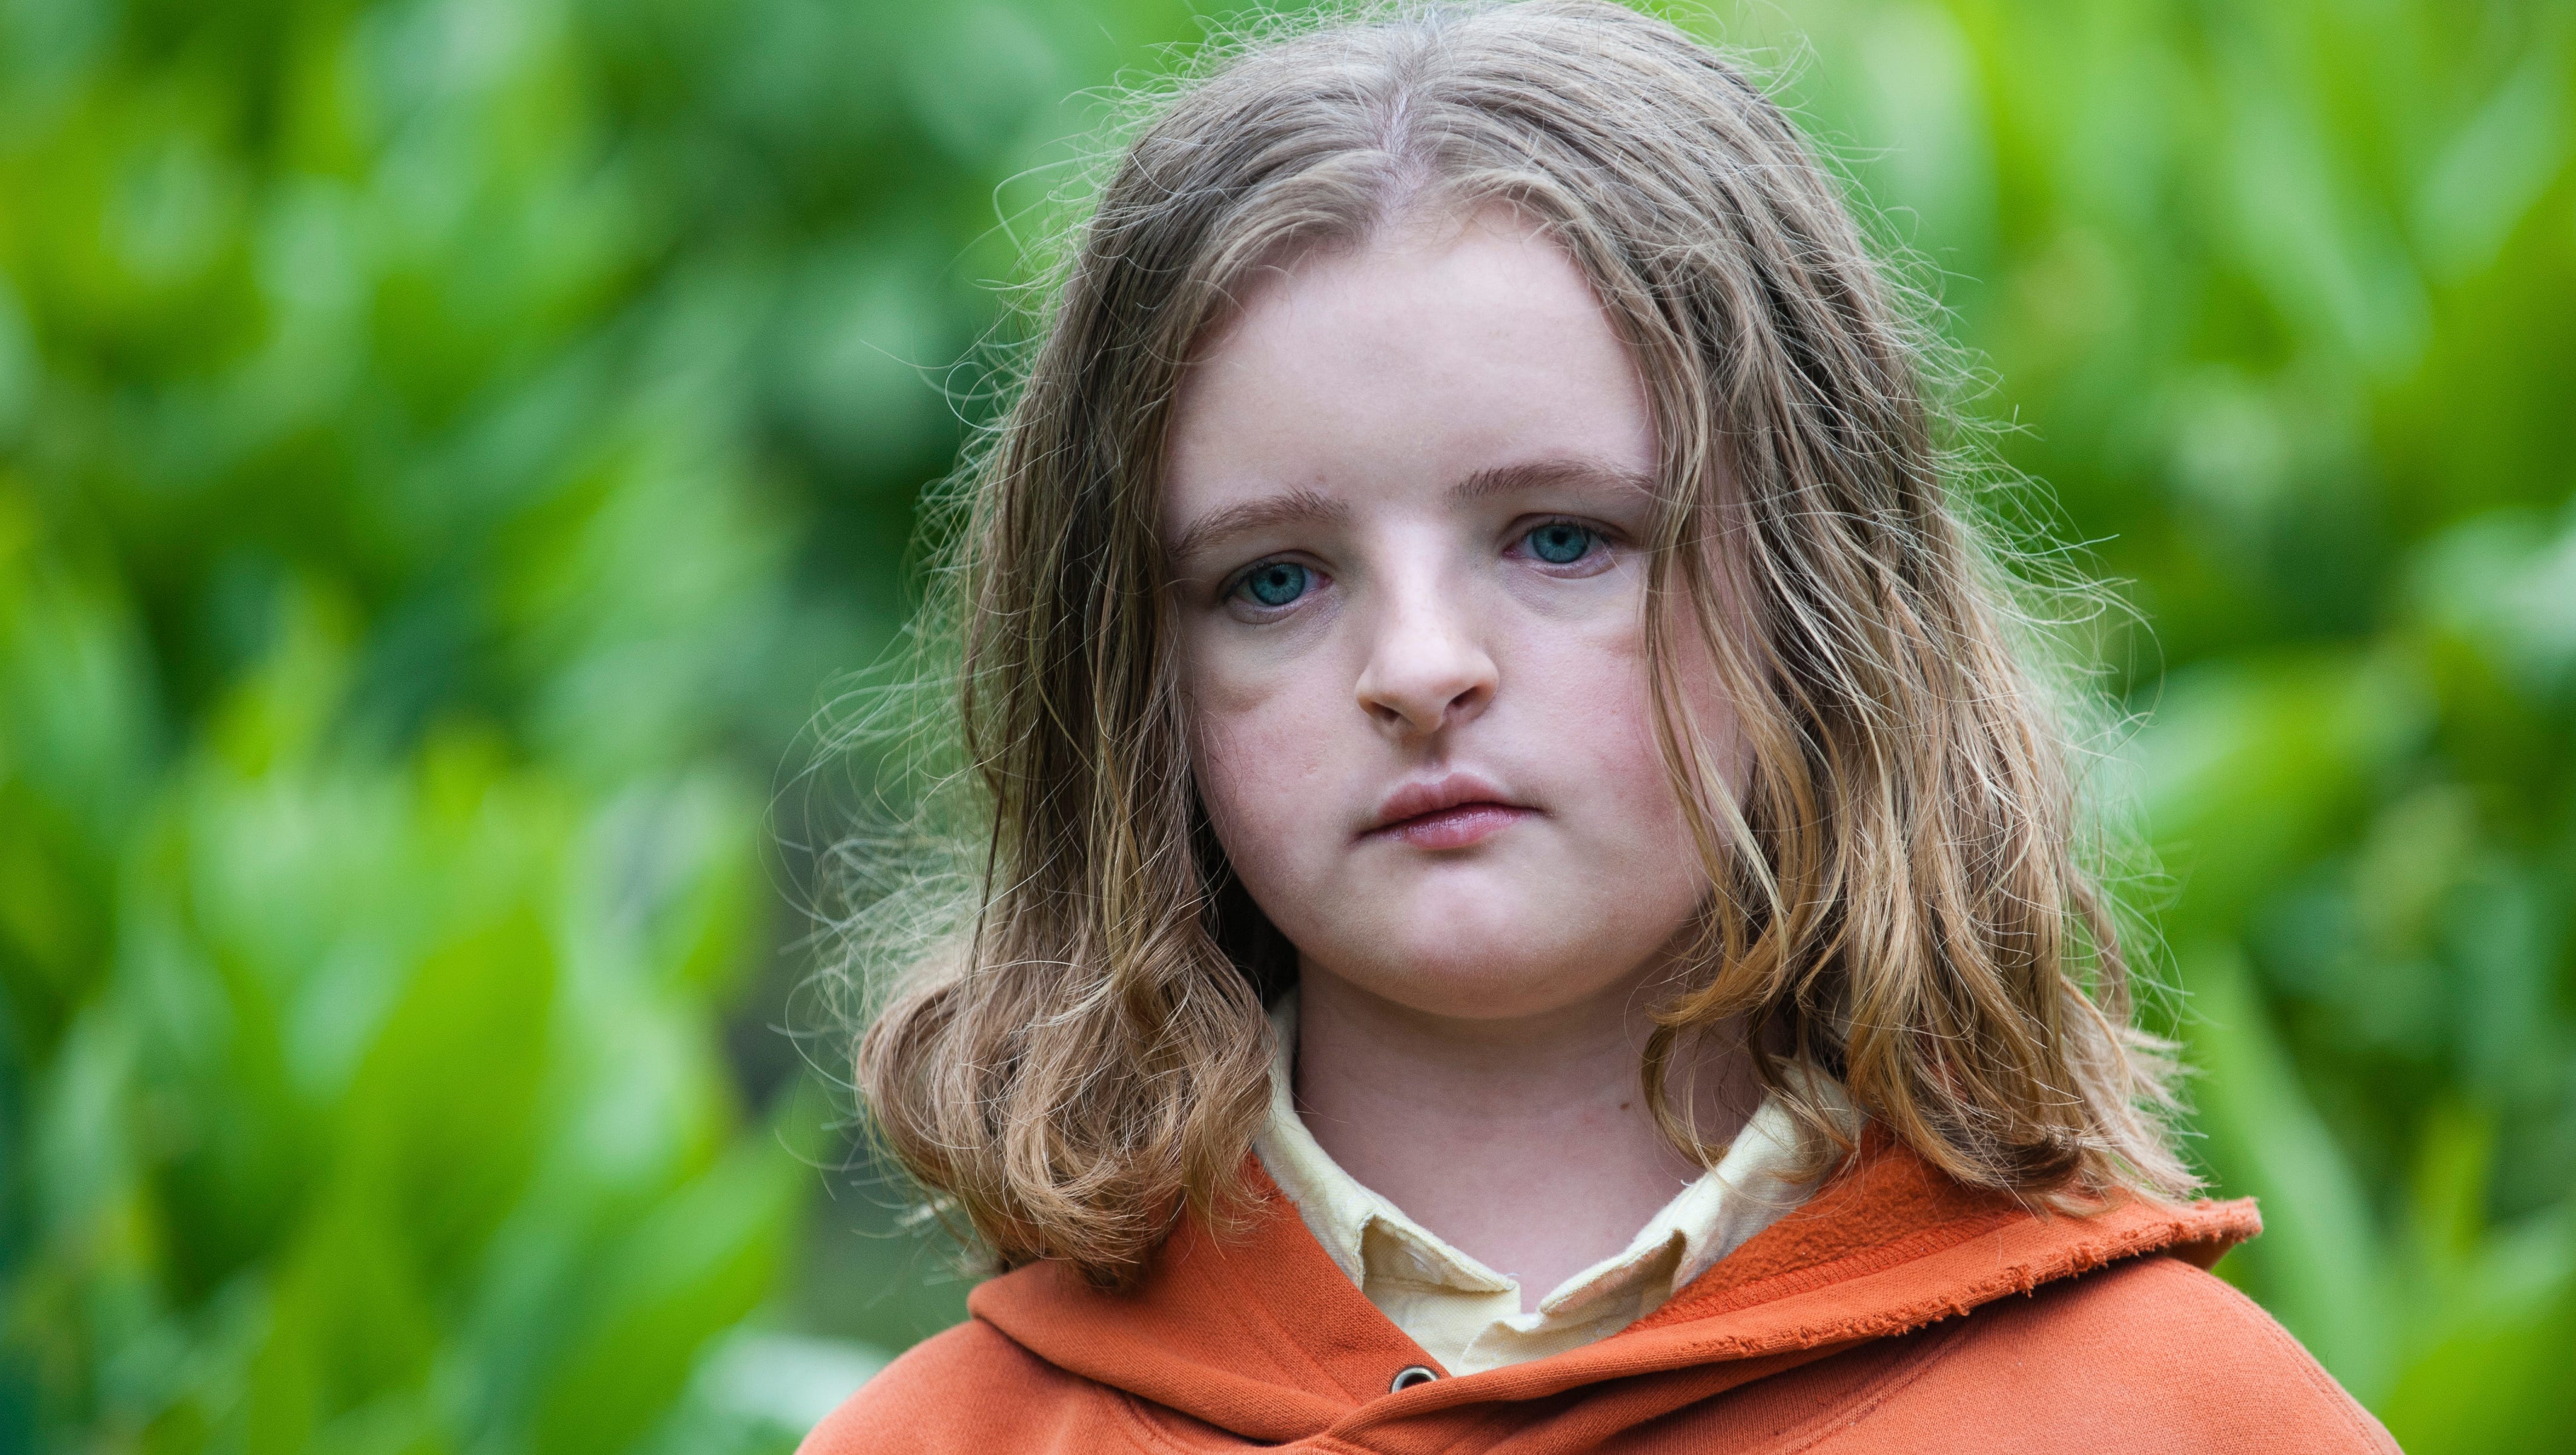 Hereditary': Milly Shapiro wants to freak you out as that creepy kid